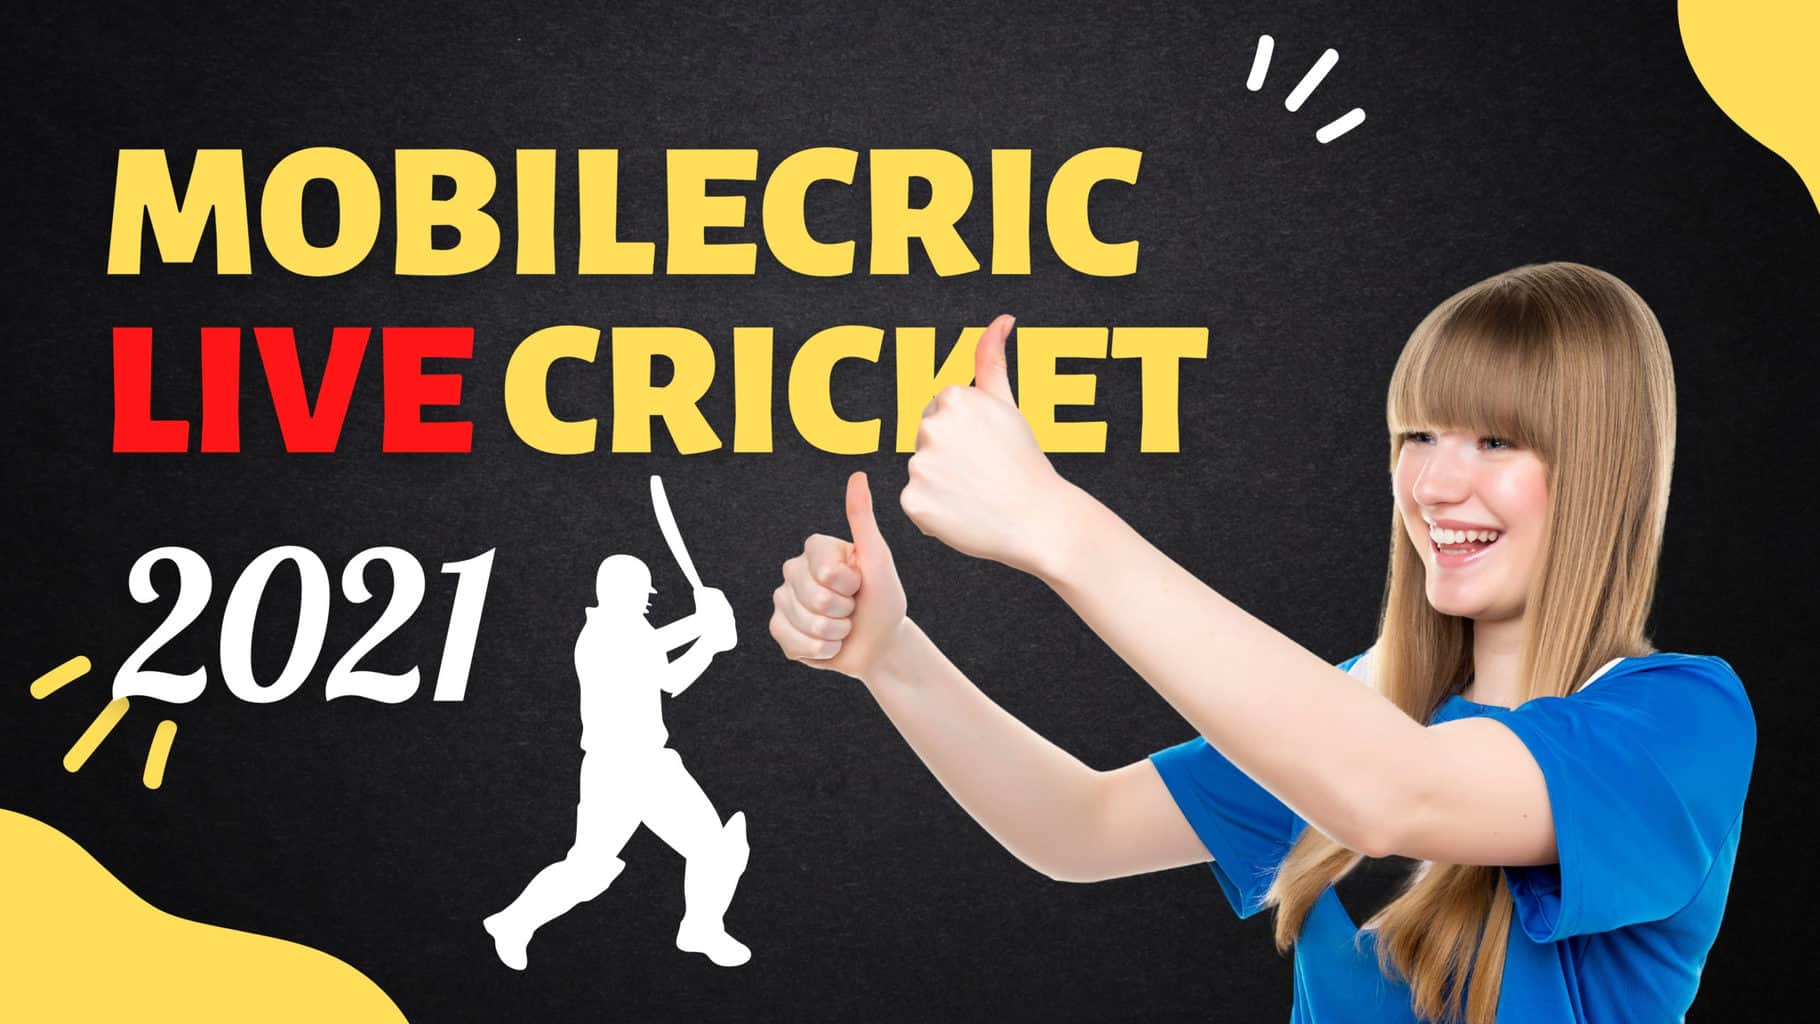 Mobilecric Live Cricket Streaming 2022 Free on Mobile